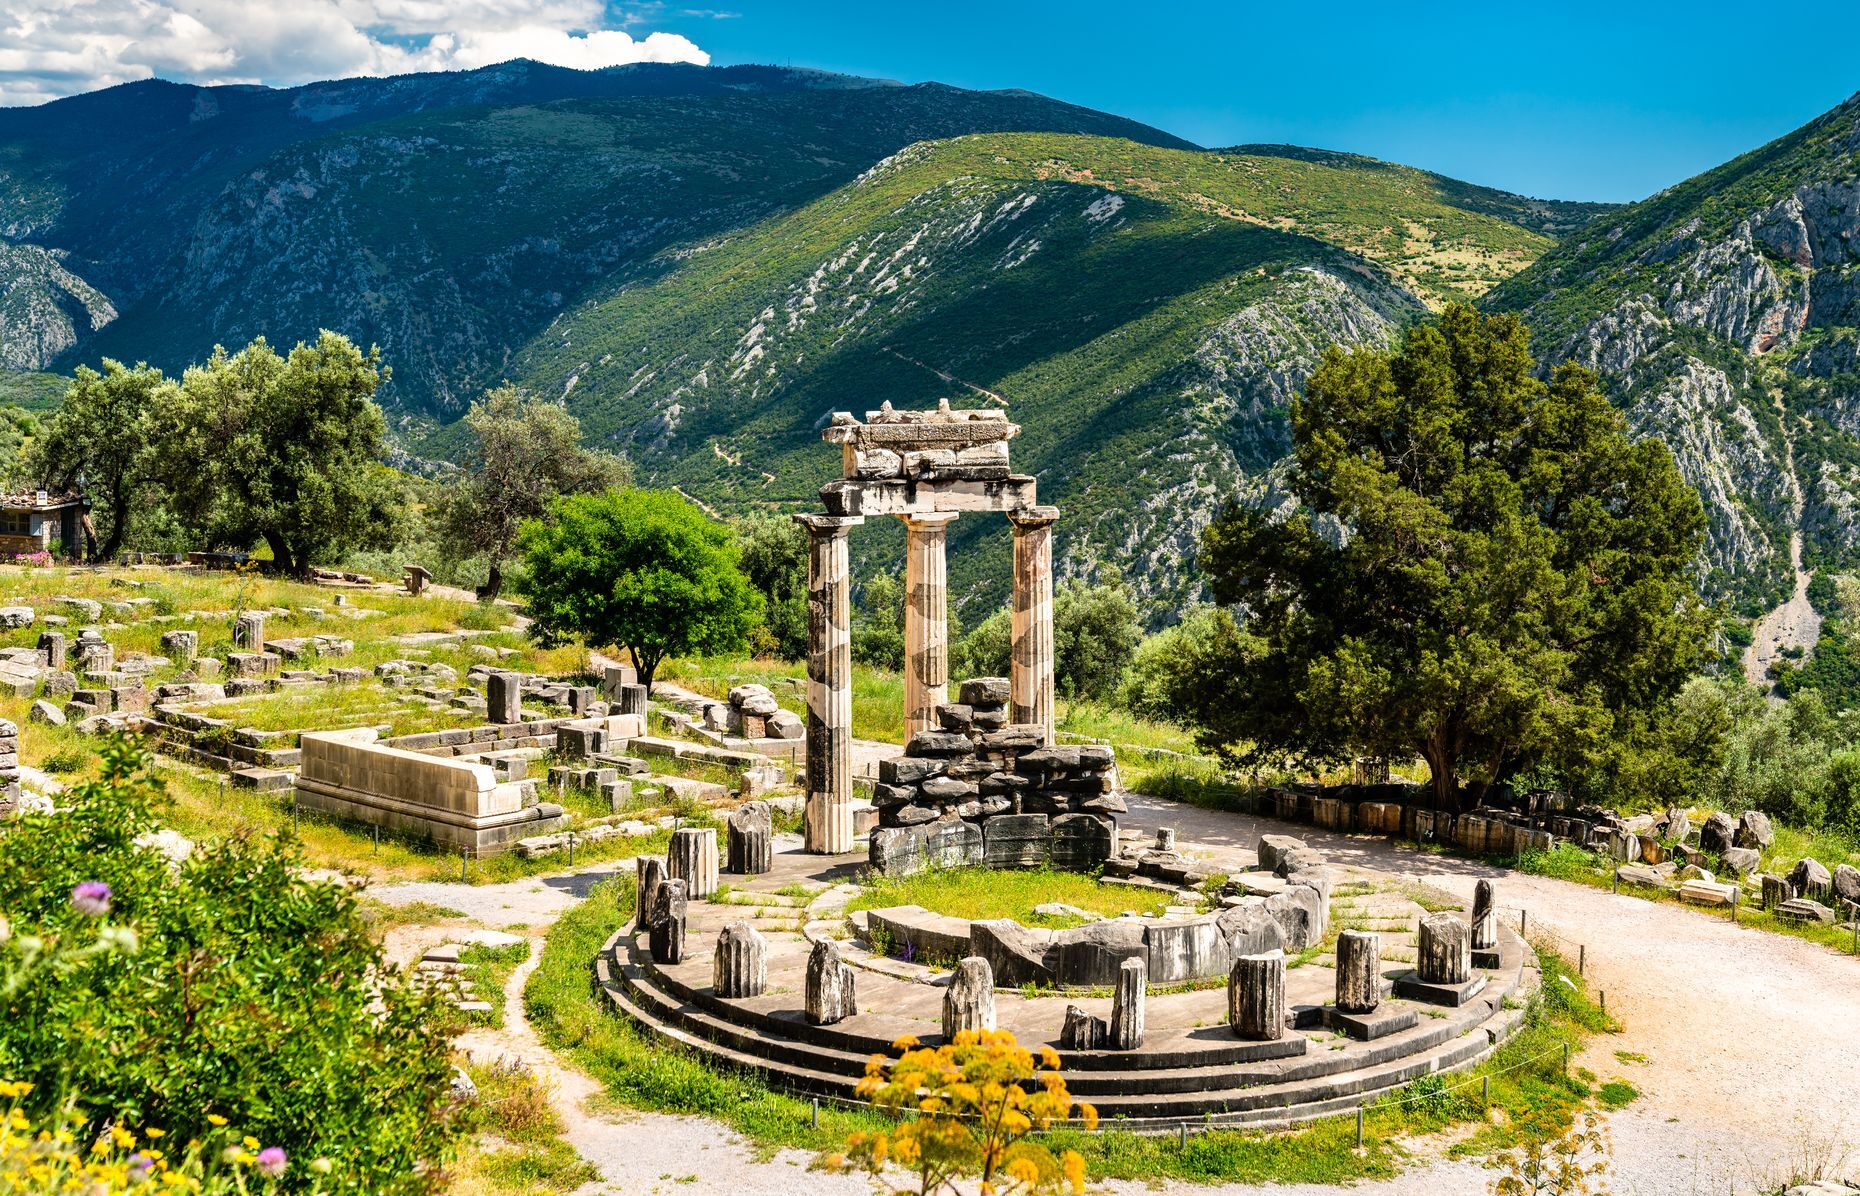 Nestled at the foot of <a href="https://www.britannica.com/place/Mount-Parnassus" rel="noreferrer noopener">Mount Parnassus</a>, <a href="https://www.discovergreece.com/central-greece/delphi" rel="noreferrer noopener">Delphi</a> transports visitors to quintessential ancient Greece and its captivating history. Located less than three hours’ drive from Athens, this city will delight fans of mythology and spirituality. Travellers can also explore the agora, ancient theatre, shrine of Athena, and Temple of Apollo. Listed as a <a href="https://whc.unesco.org/en/list/393/" rel="noreferrer noopener">UNESCO</a> World Heritage site, Delphi’s archaeological site attracts visitors intrigued by its Oracle, the mythical place where priestesses once made prophecies.